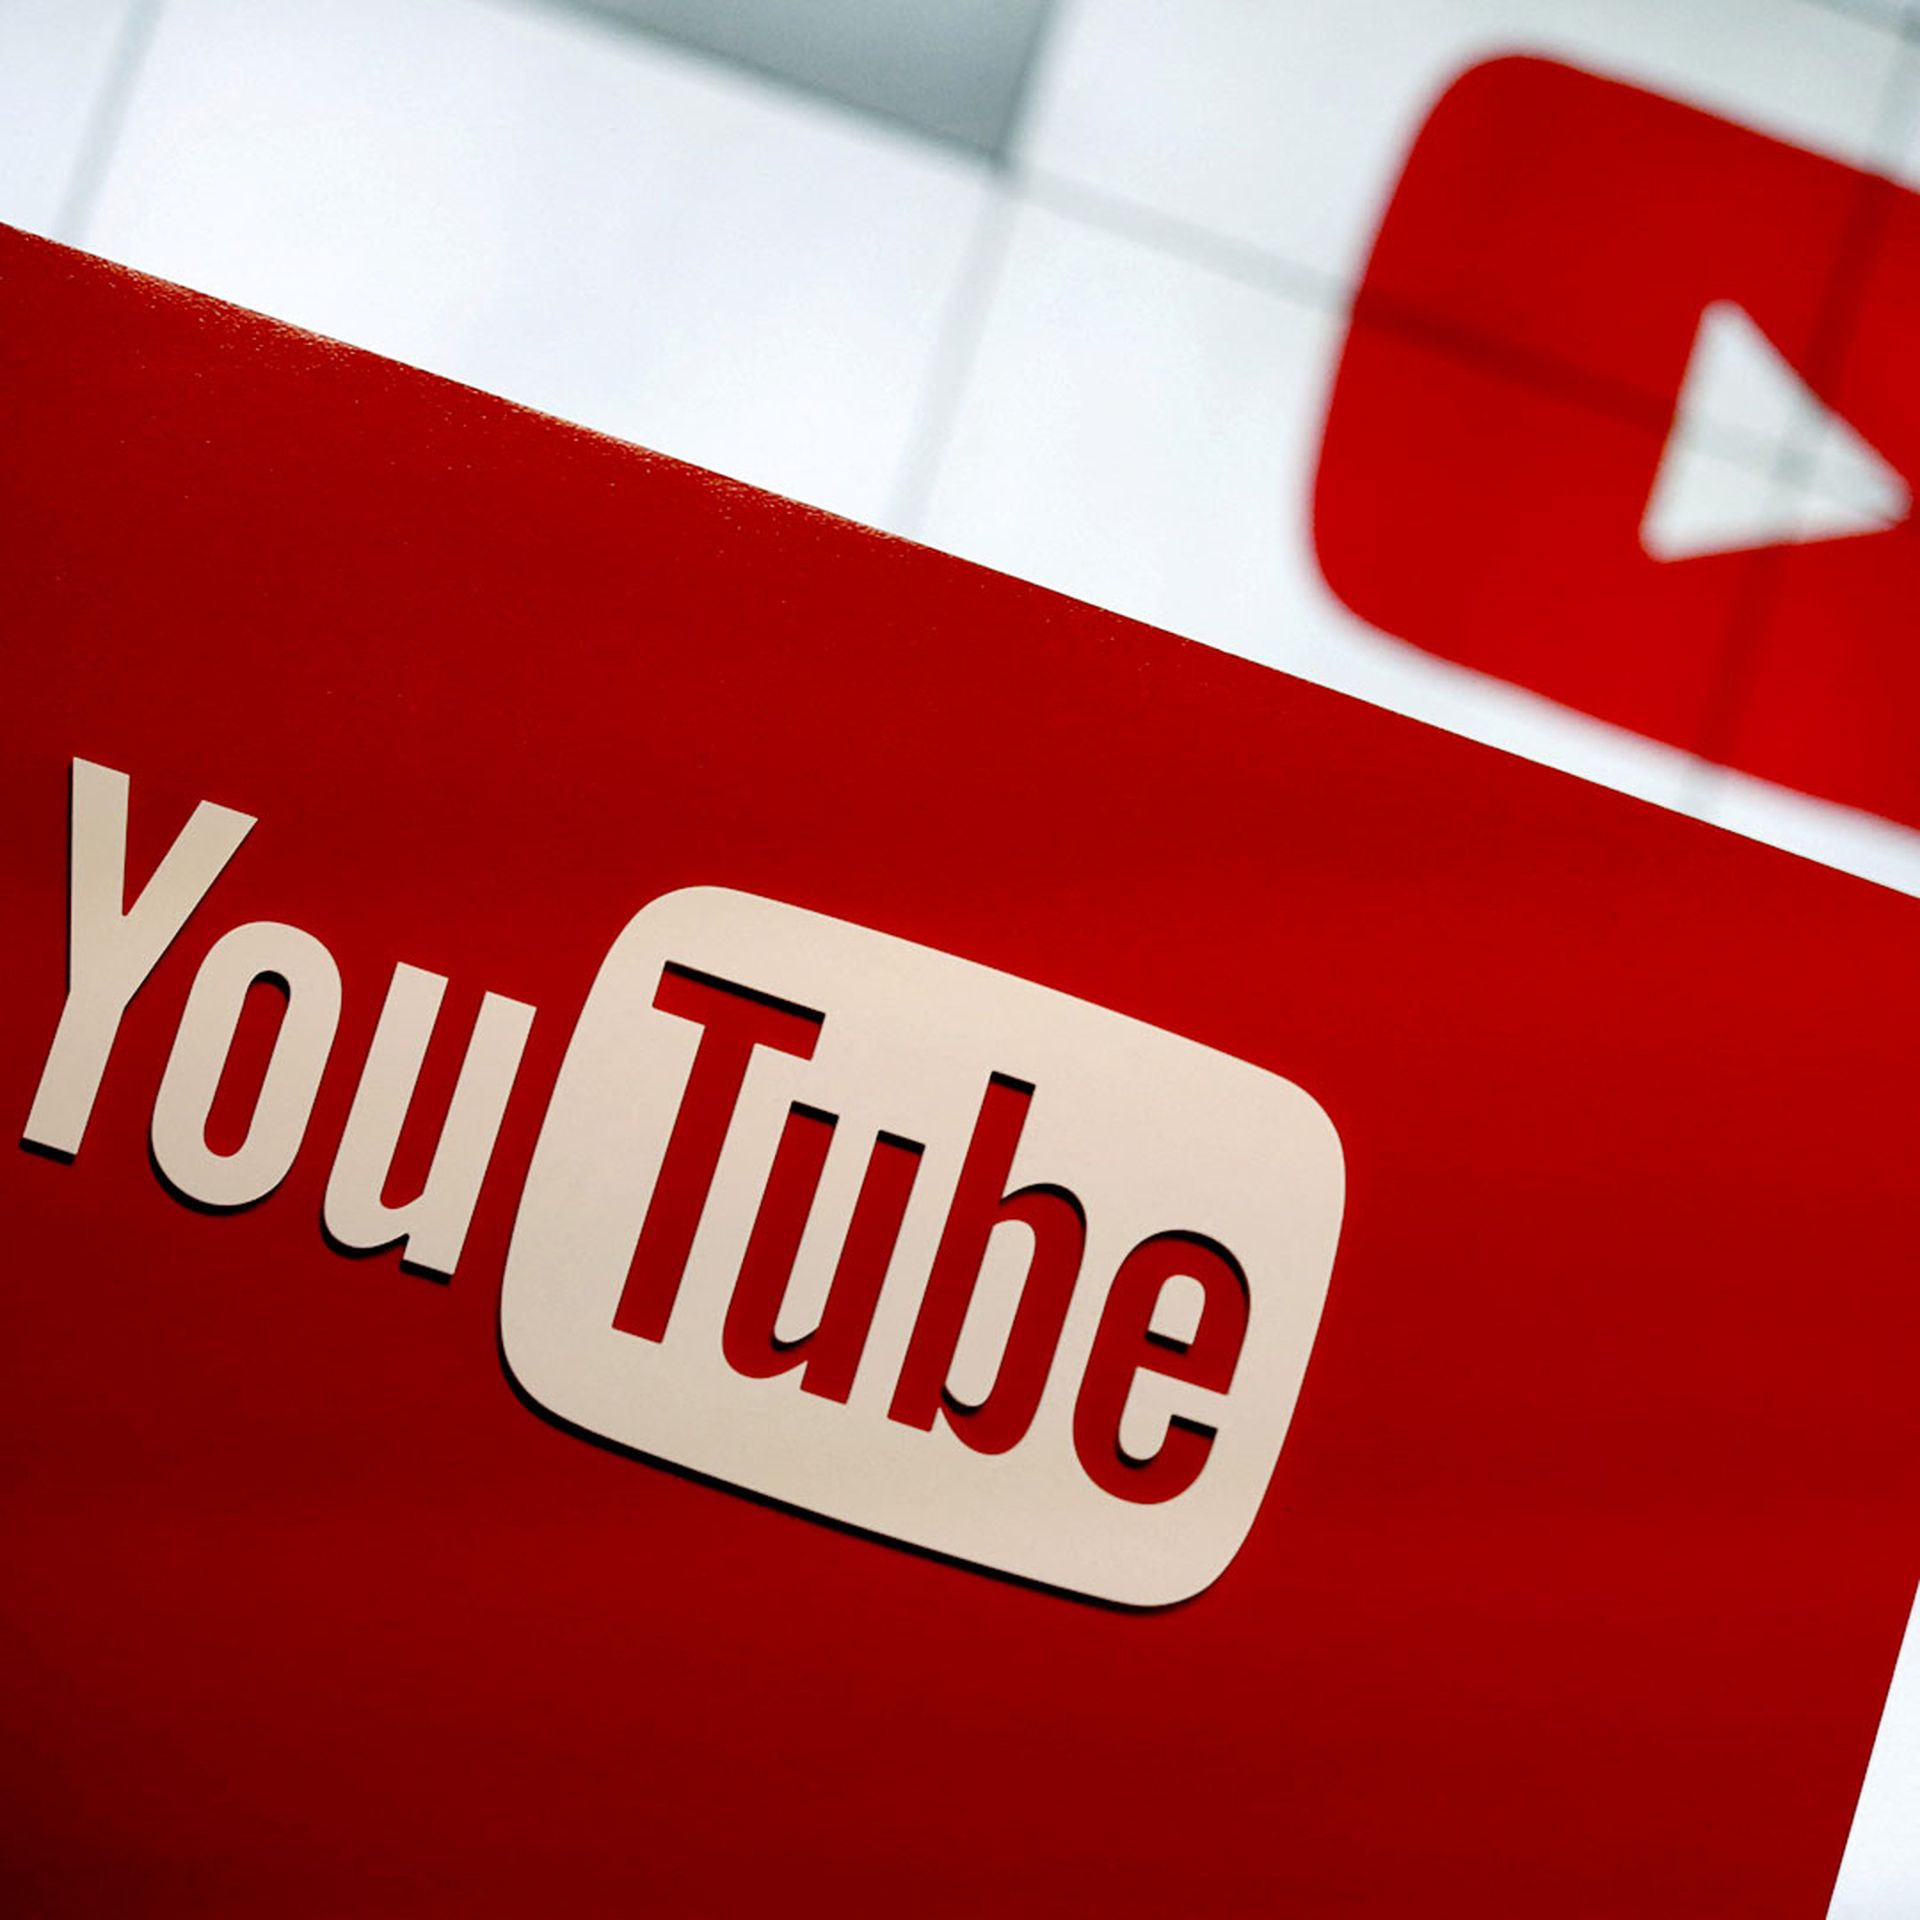 In this article, we are going to be going over the most watched videos on Youtube in 2022, which are all a part of the billion views club on Youtube.